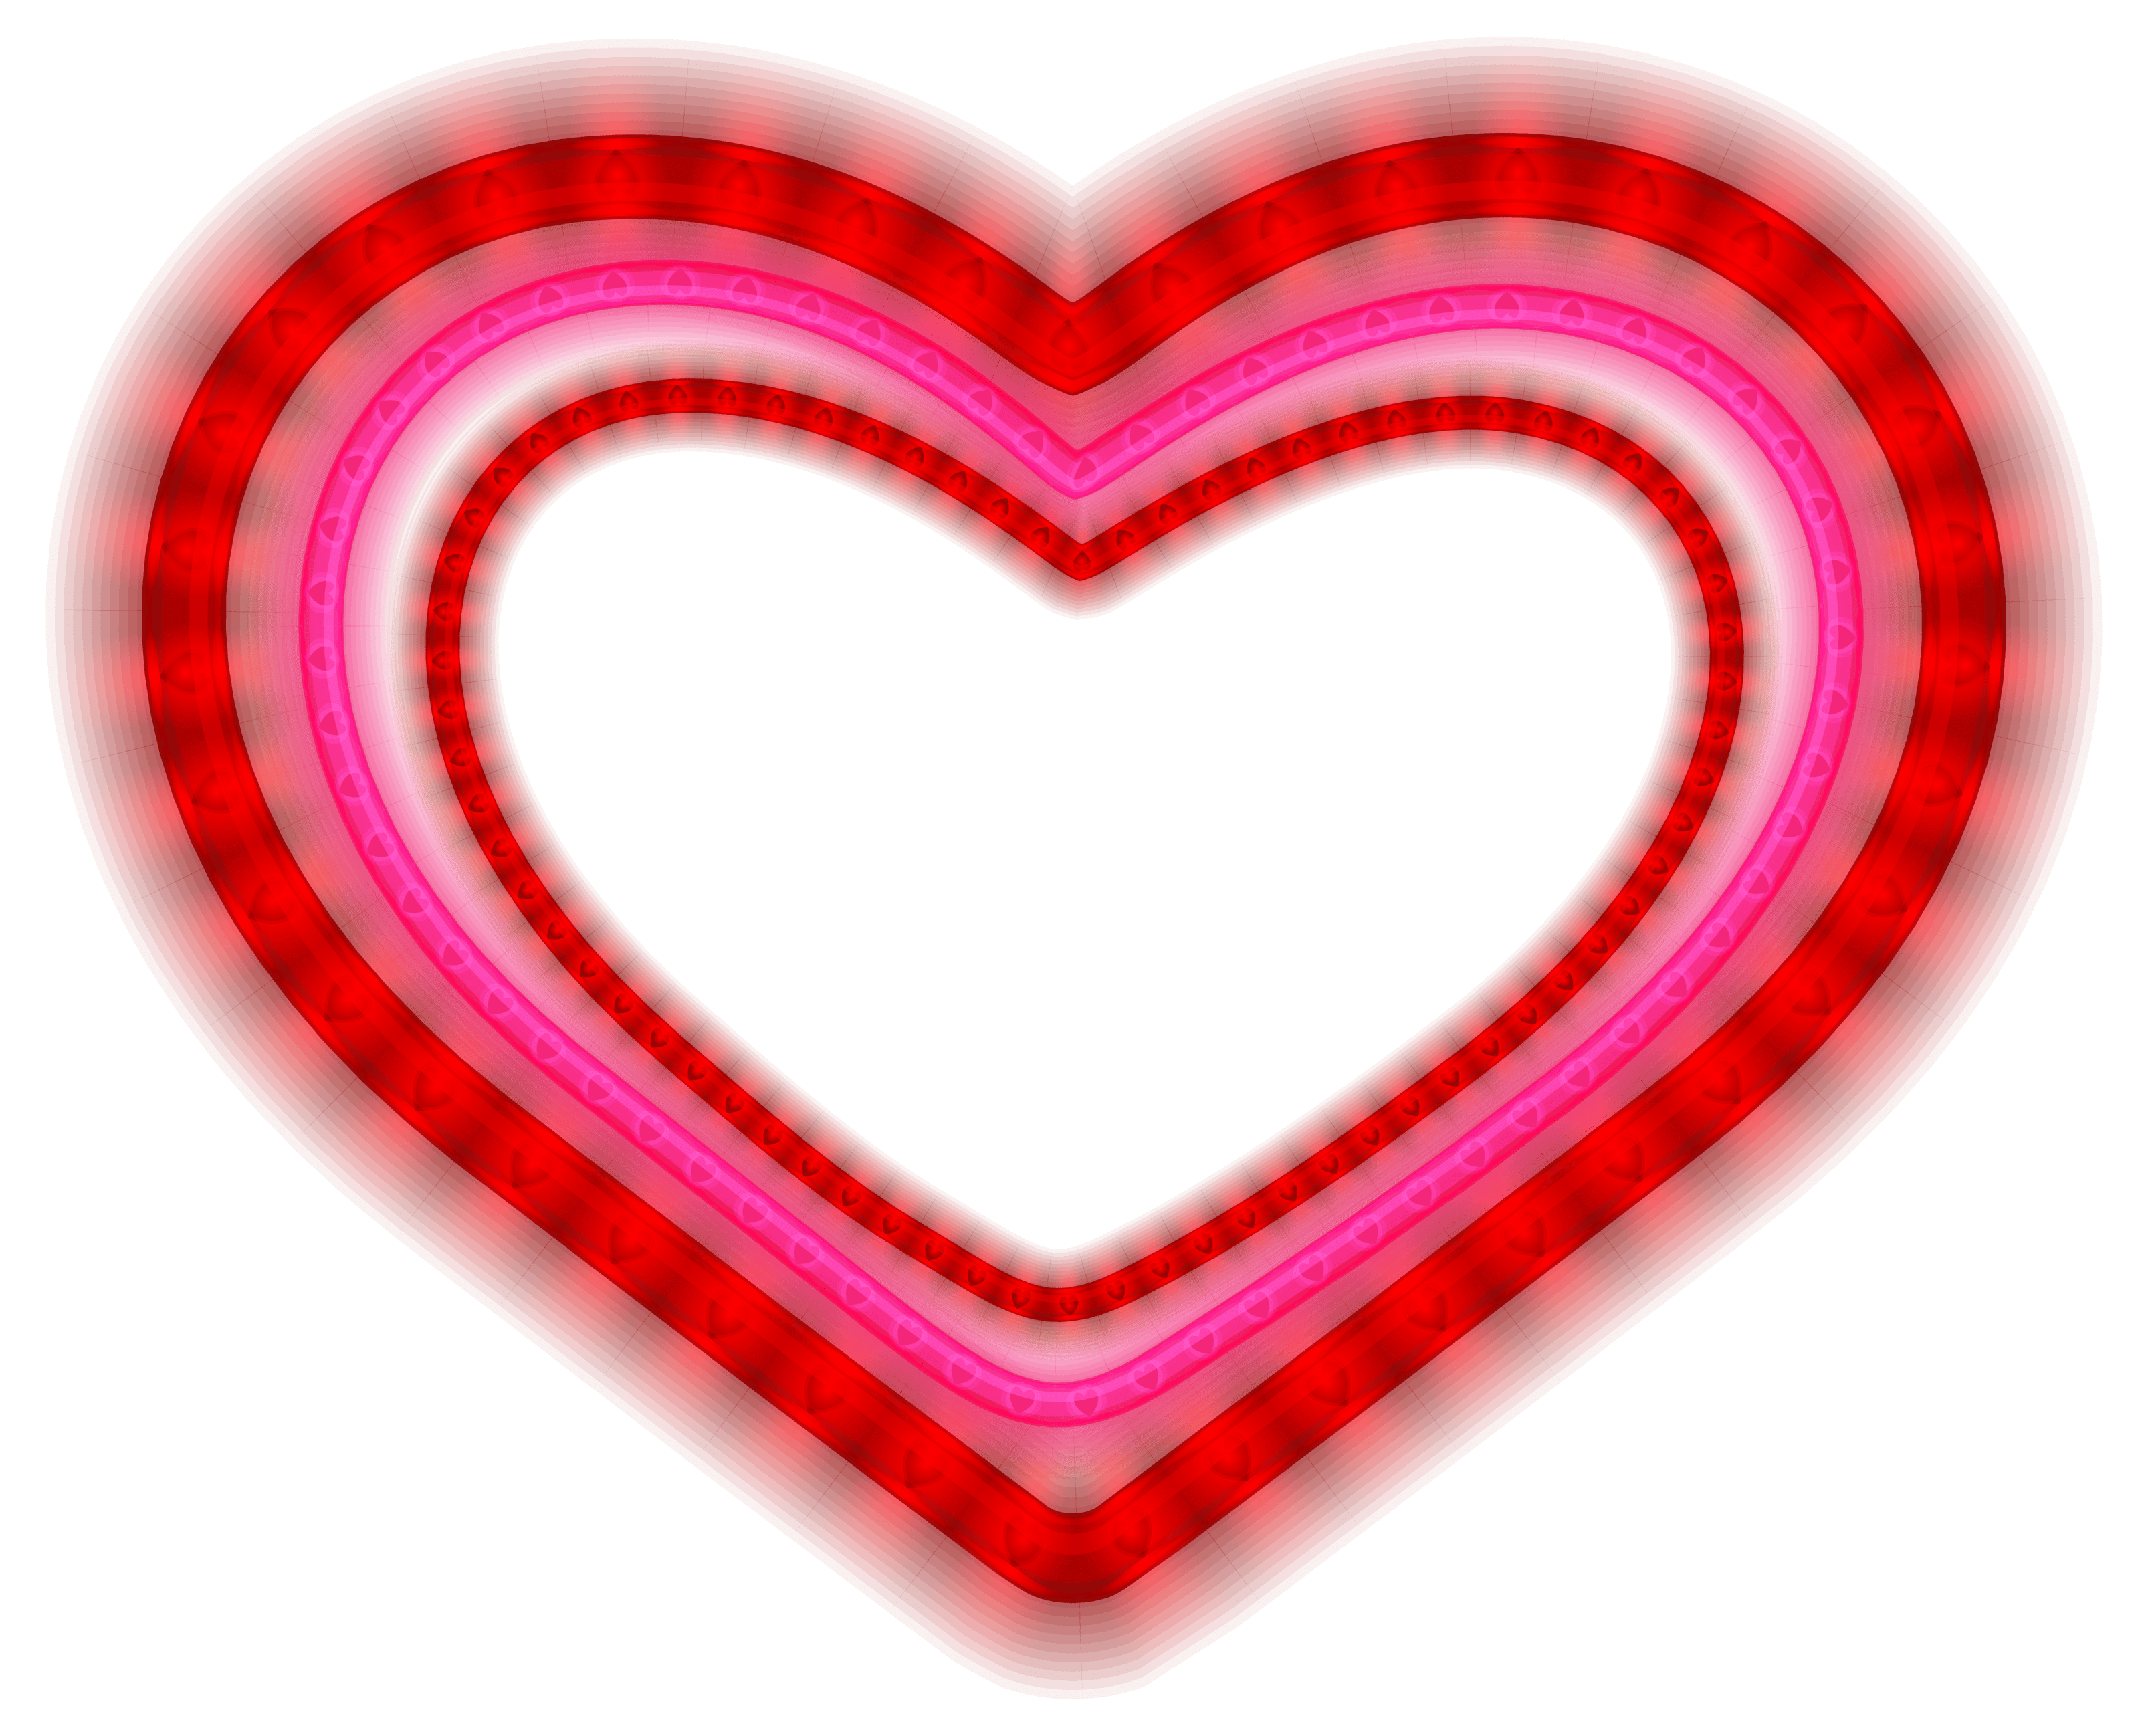 Shining Heart PNG Clipart Image